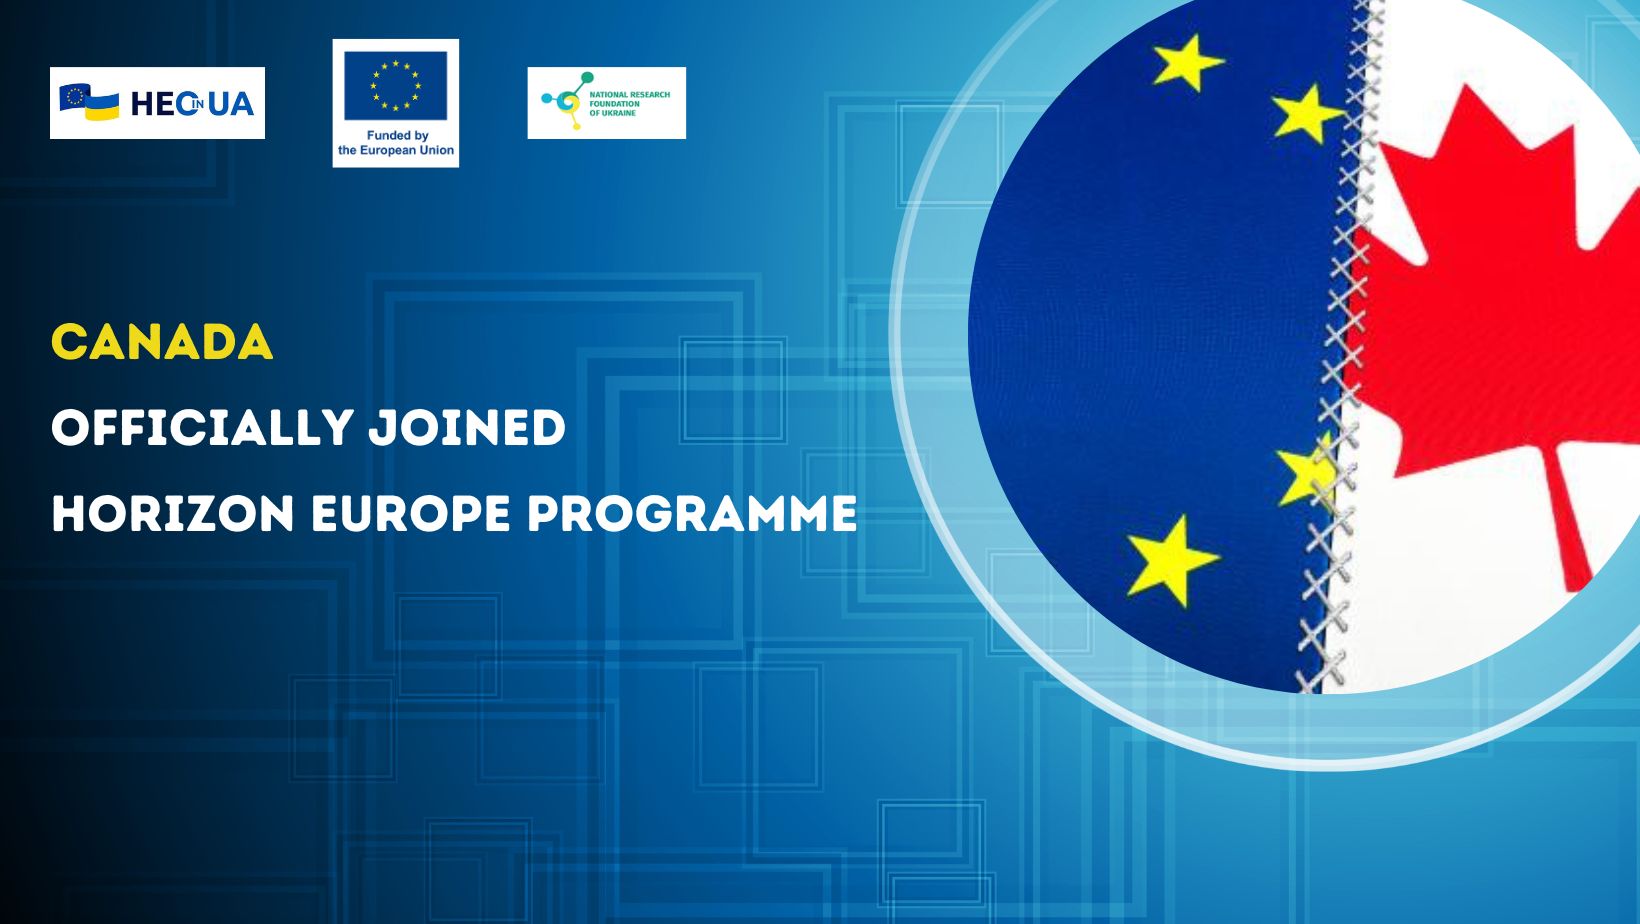 Canada officially joined Horizon Europe programme